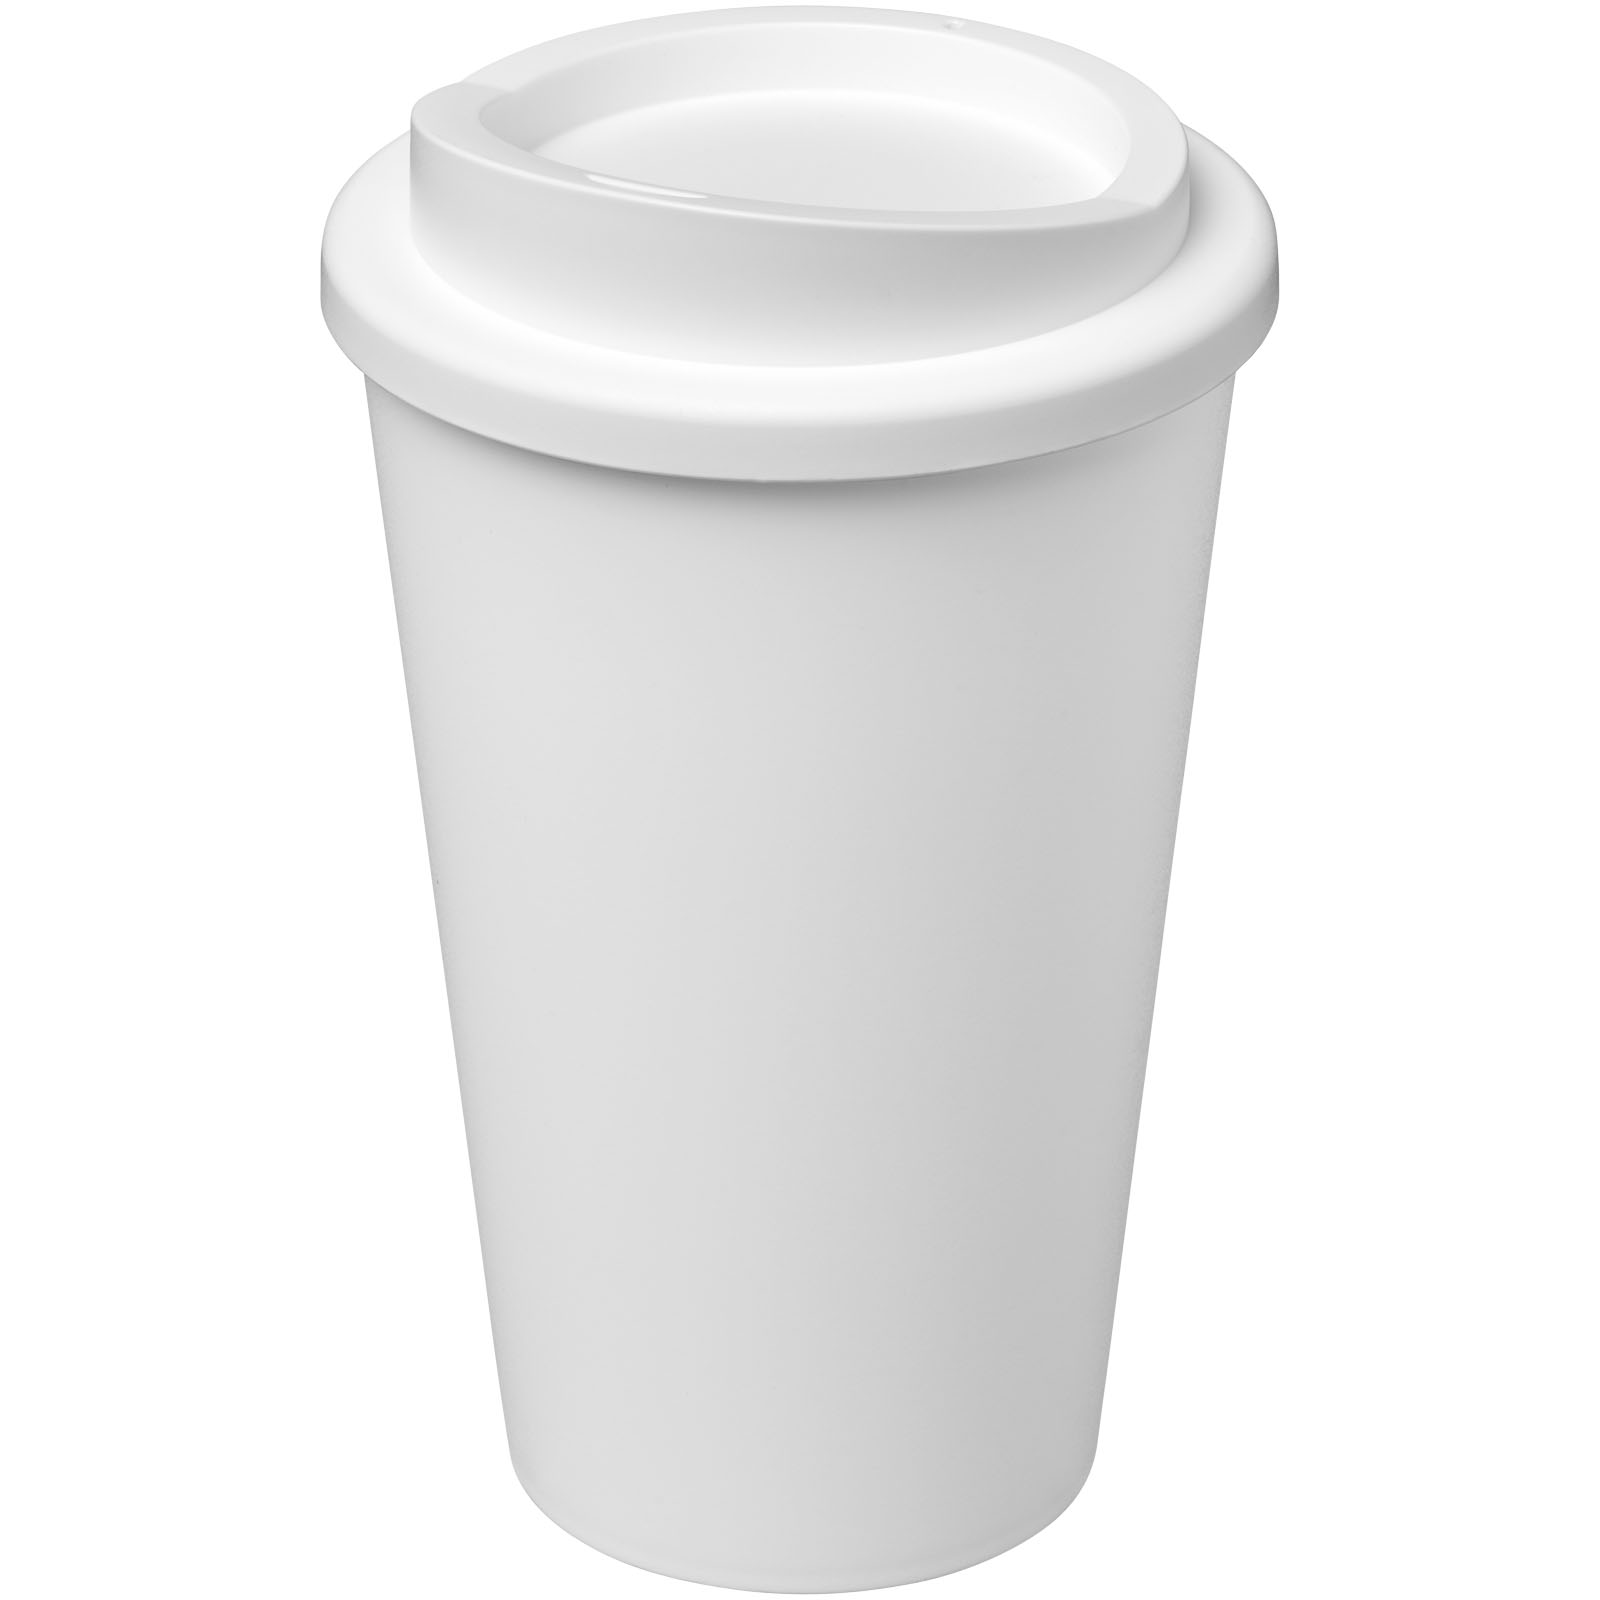 Plastic thermo mug Americano STERLING with Biomaster technology, 350 ml - white